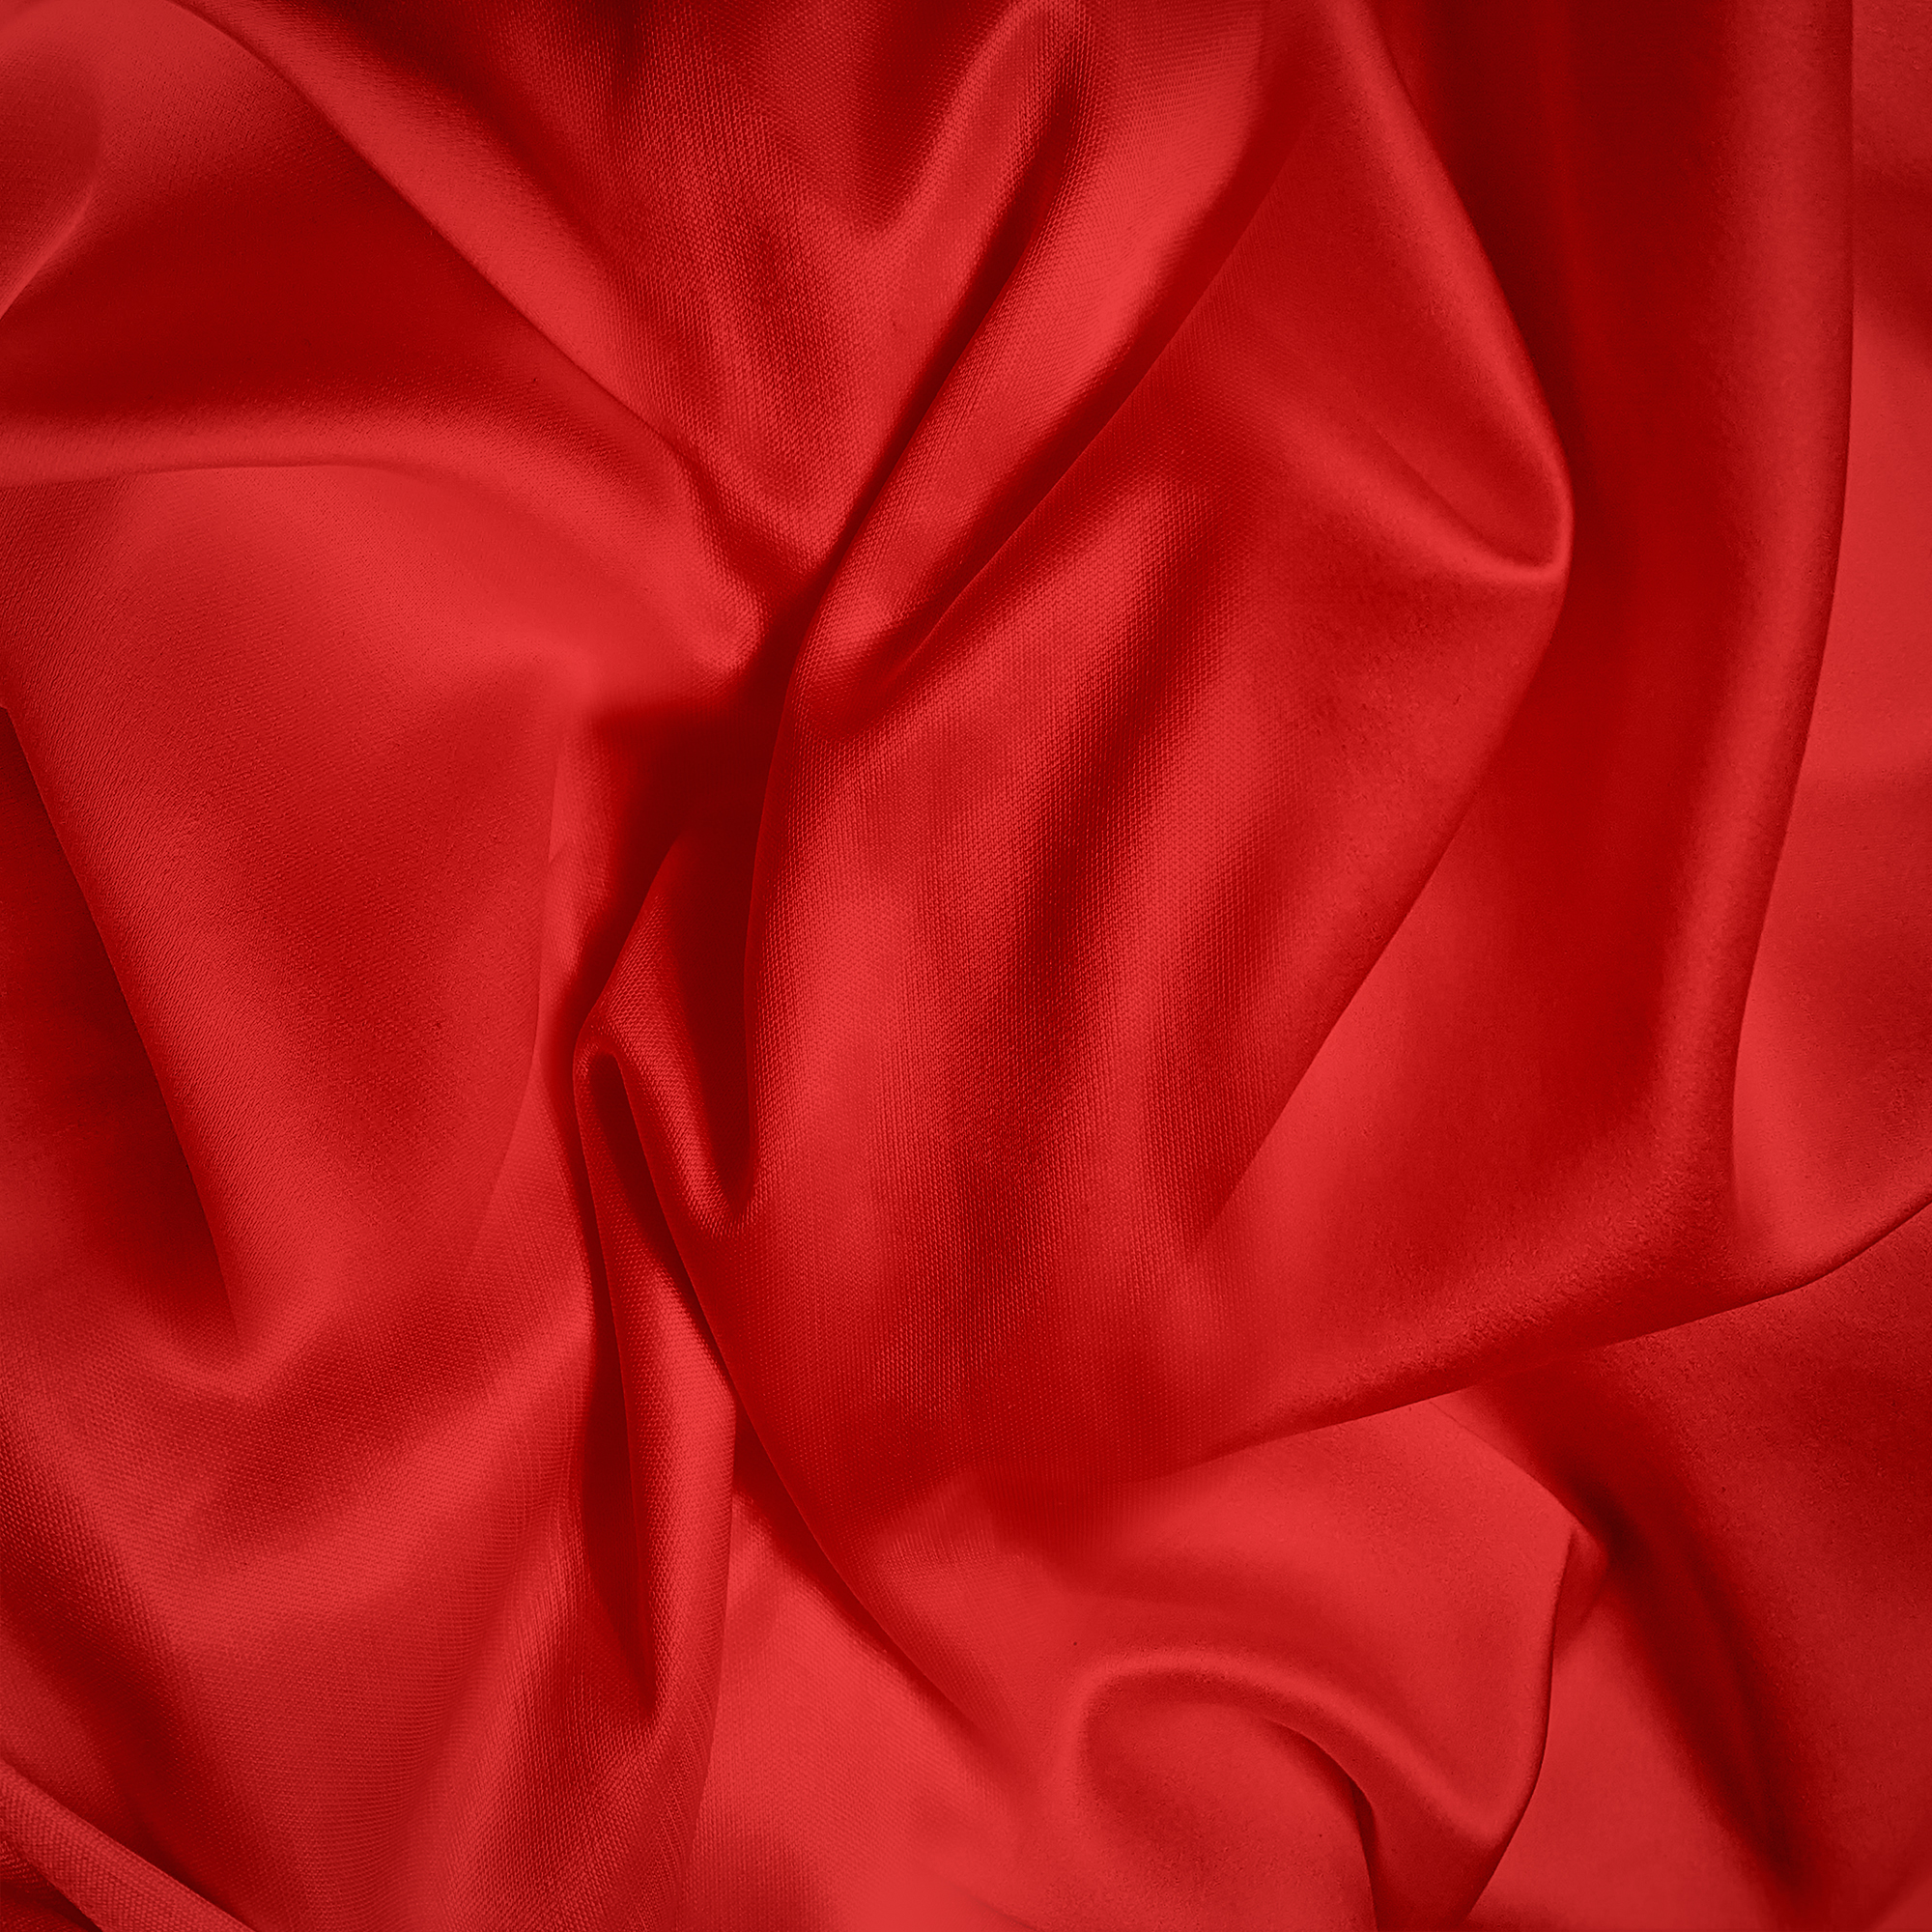 Red Background Photos, Download The BEST Free Red Background Stock